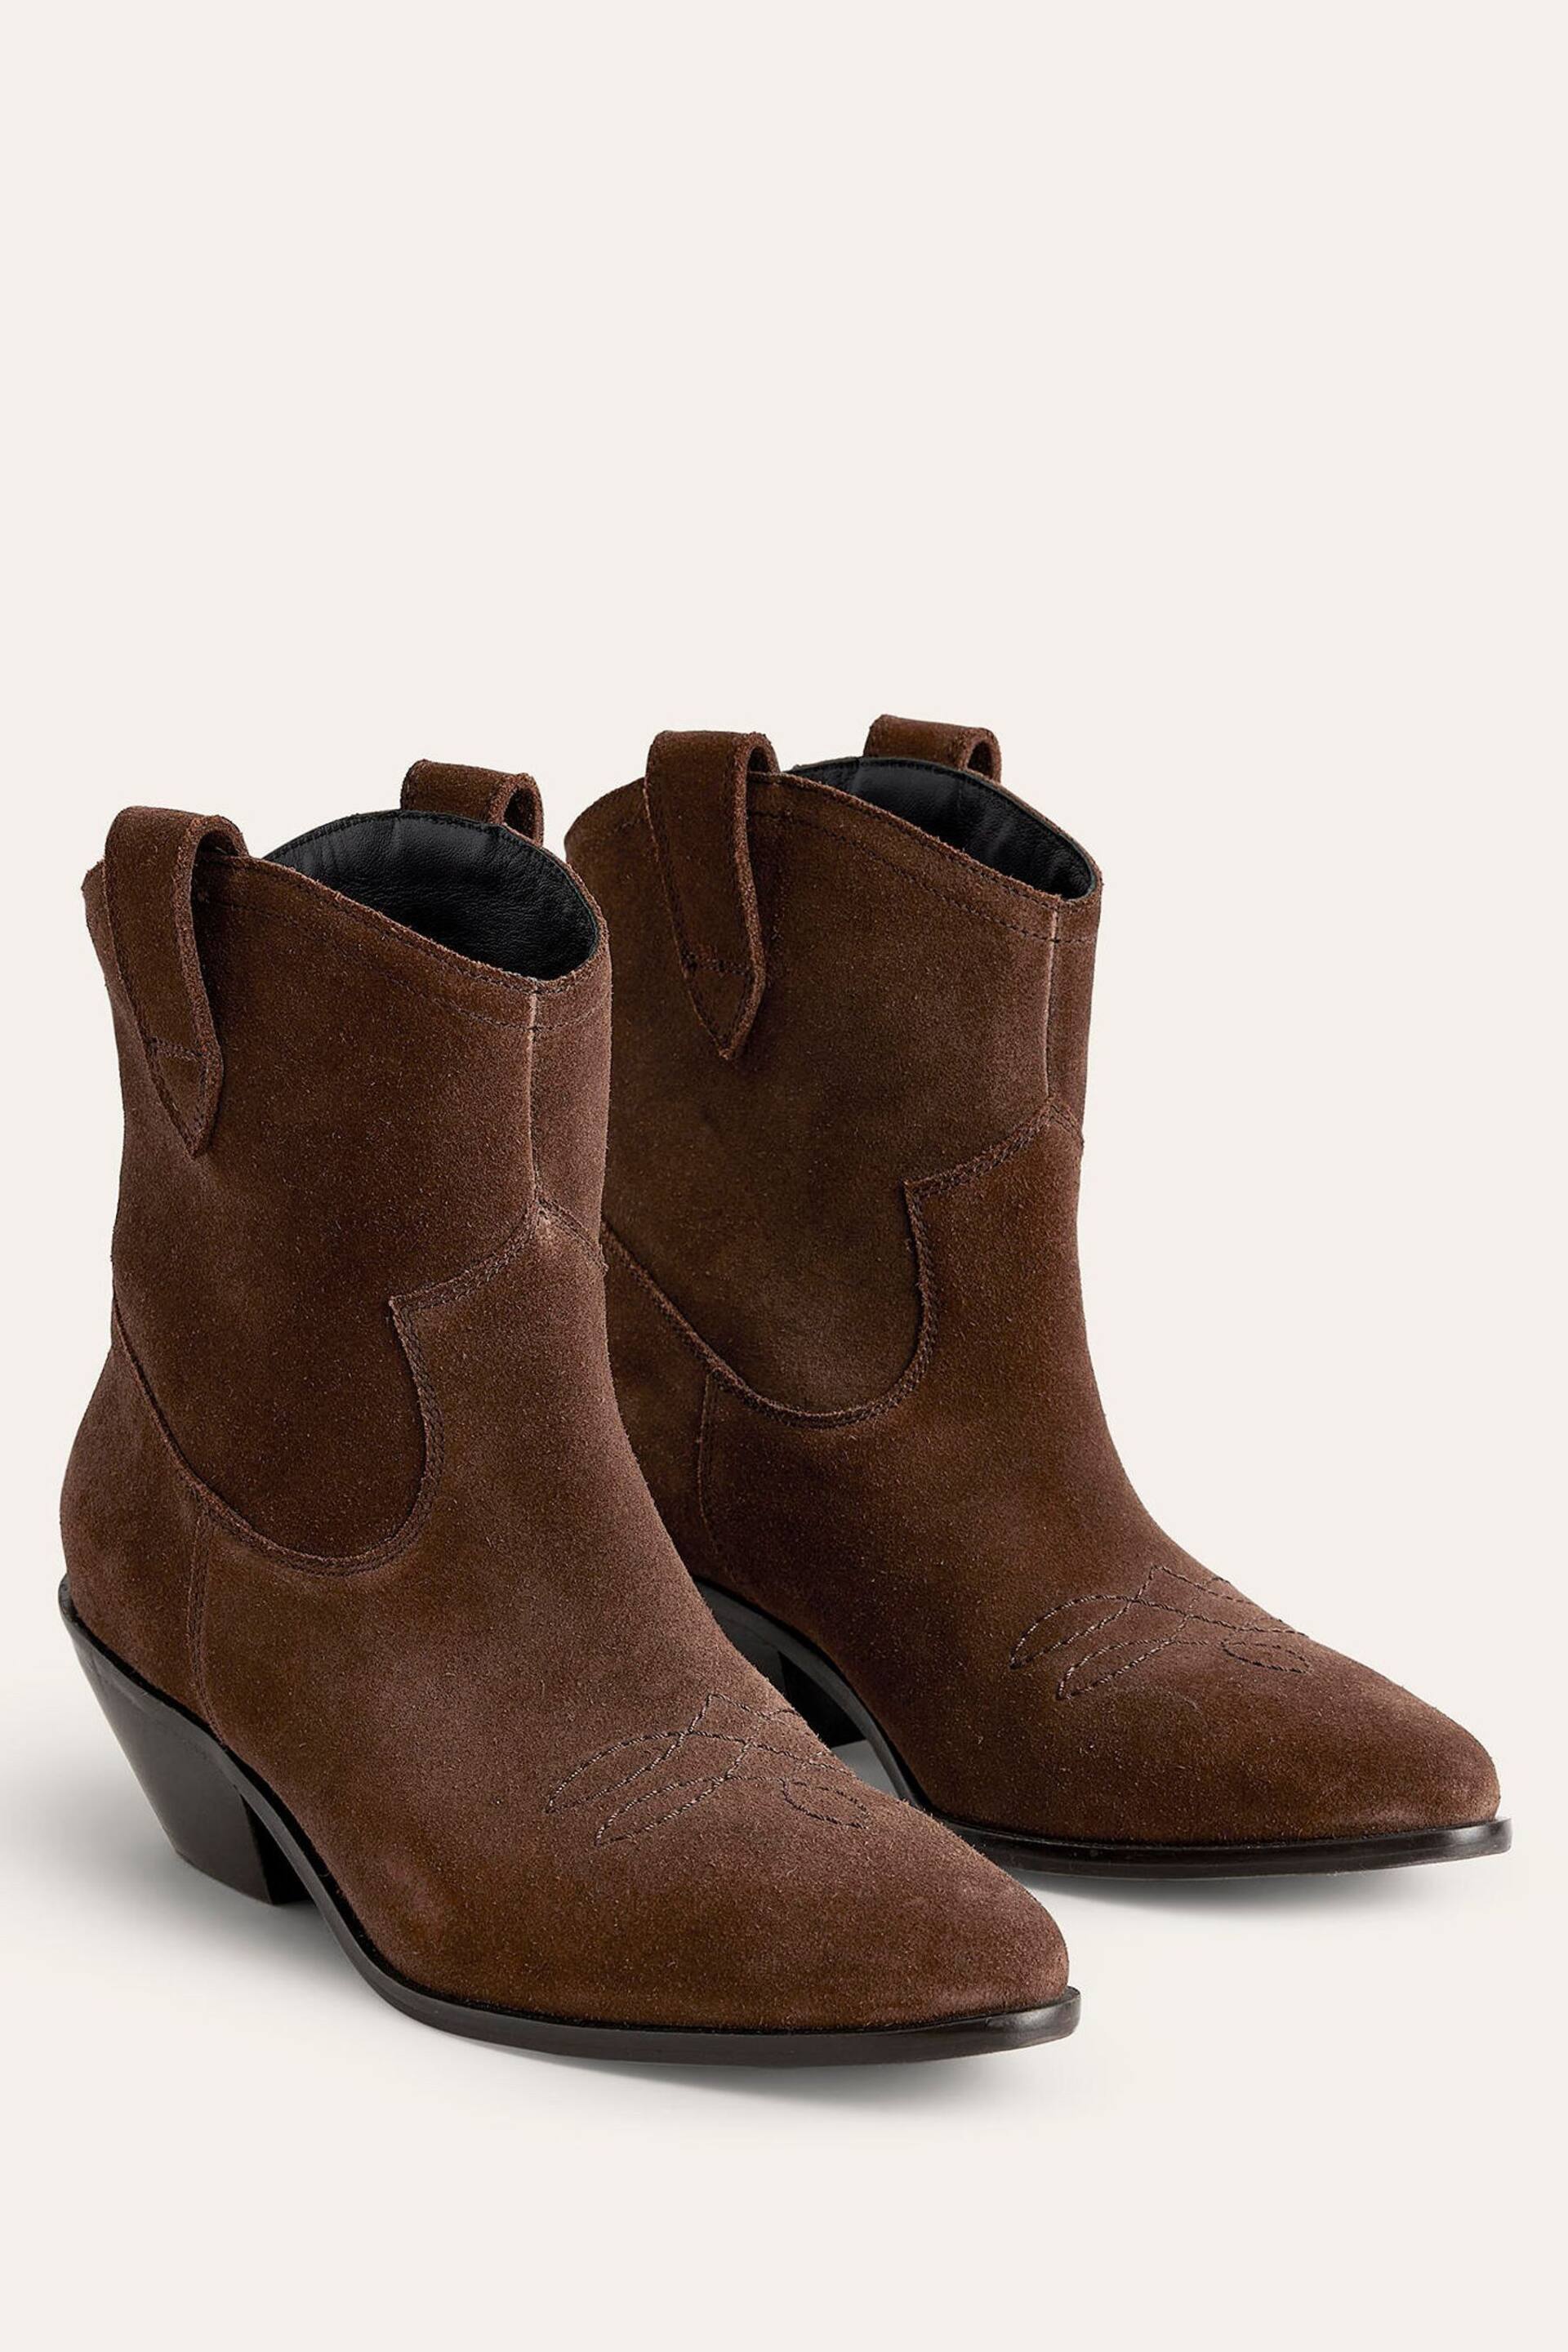 Boden Brown Western Ankle Boots - Image 3 of 5